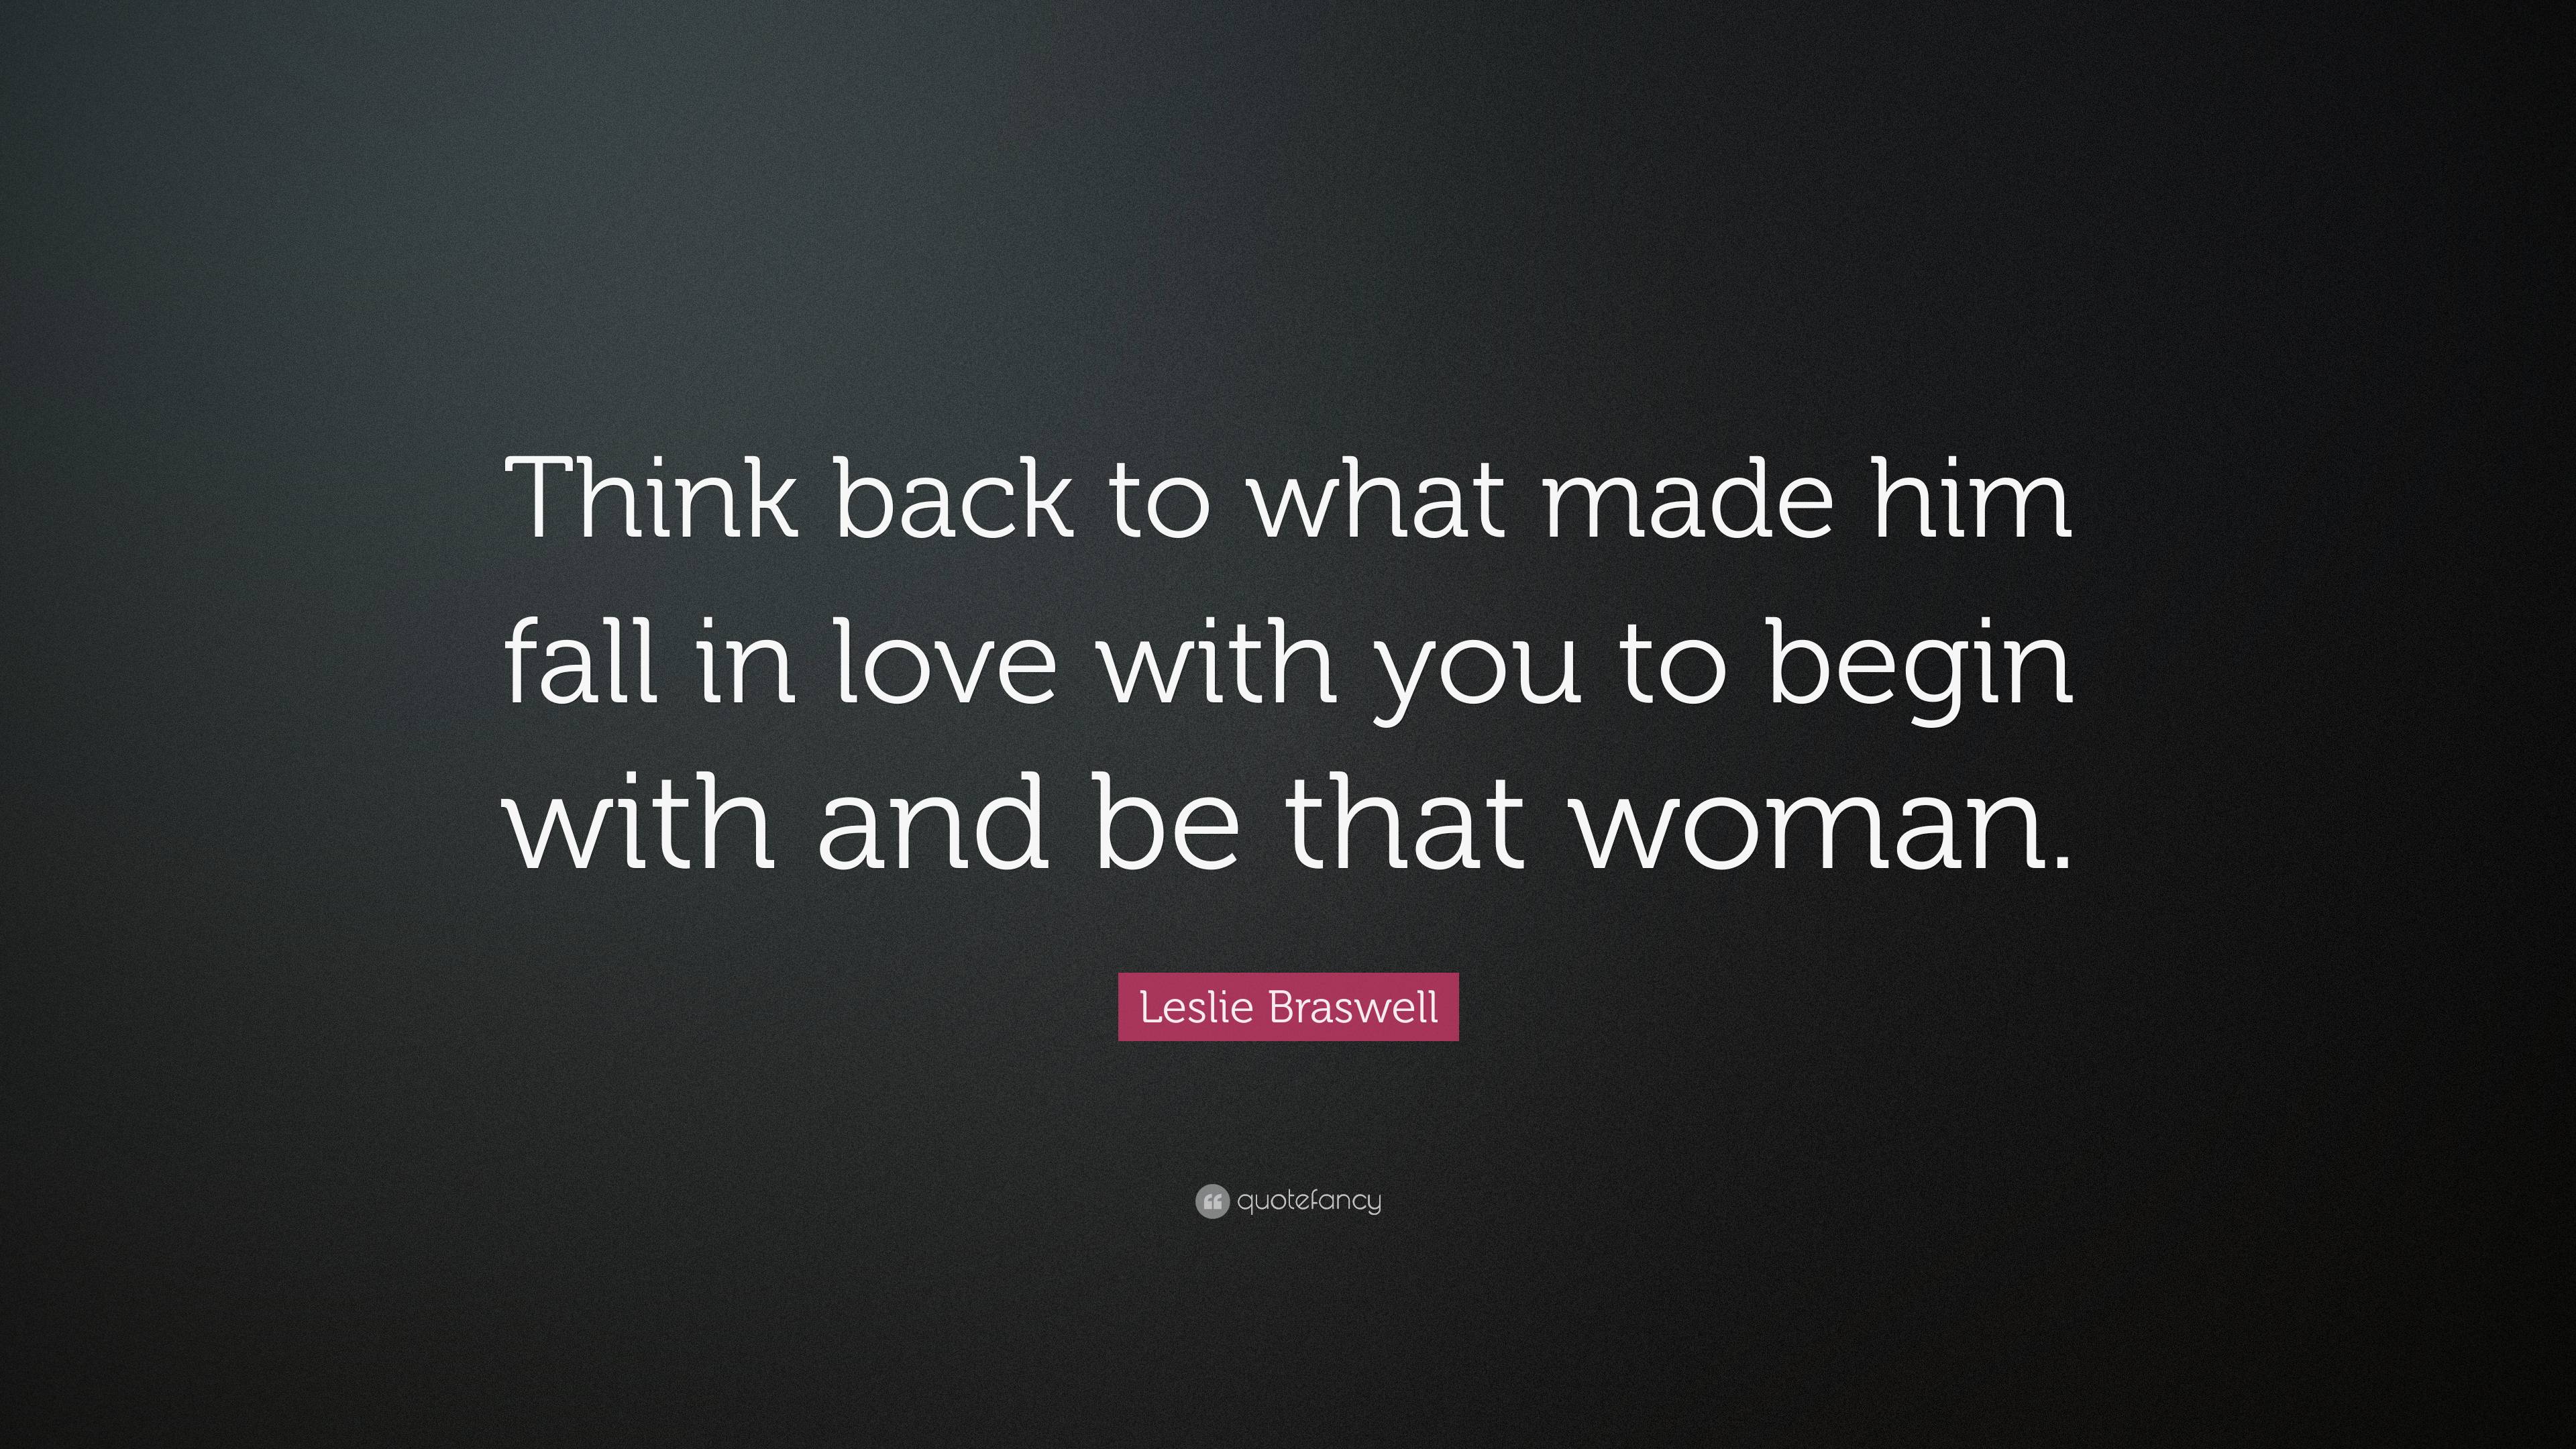 Leslie Braswell Quote: “Think back to what made him fall in love with ...